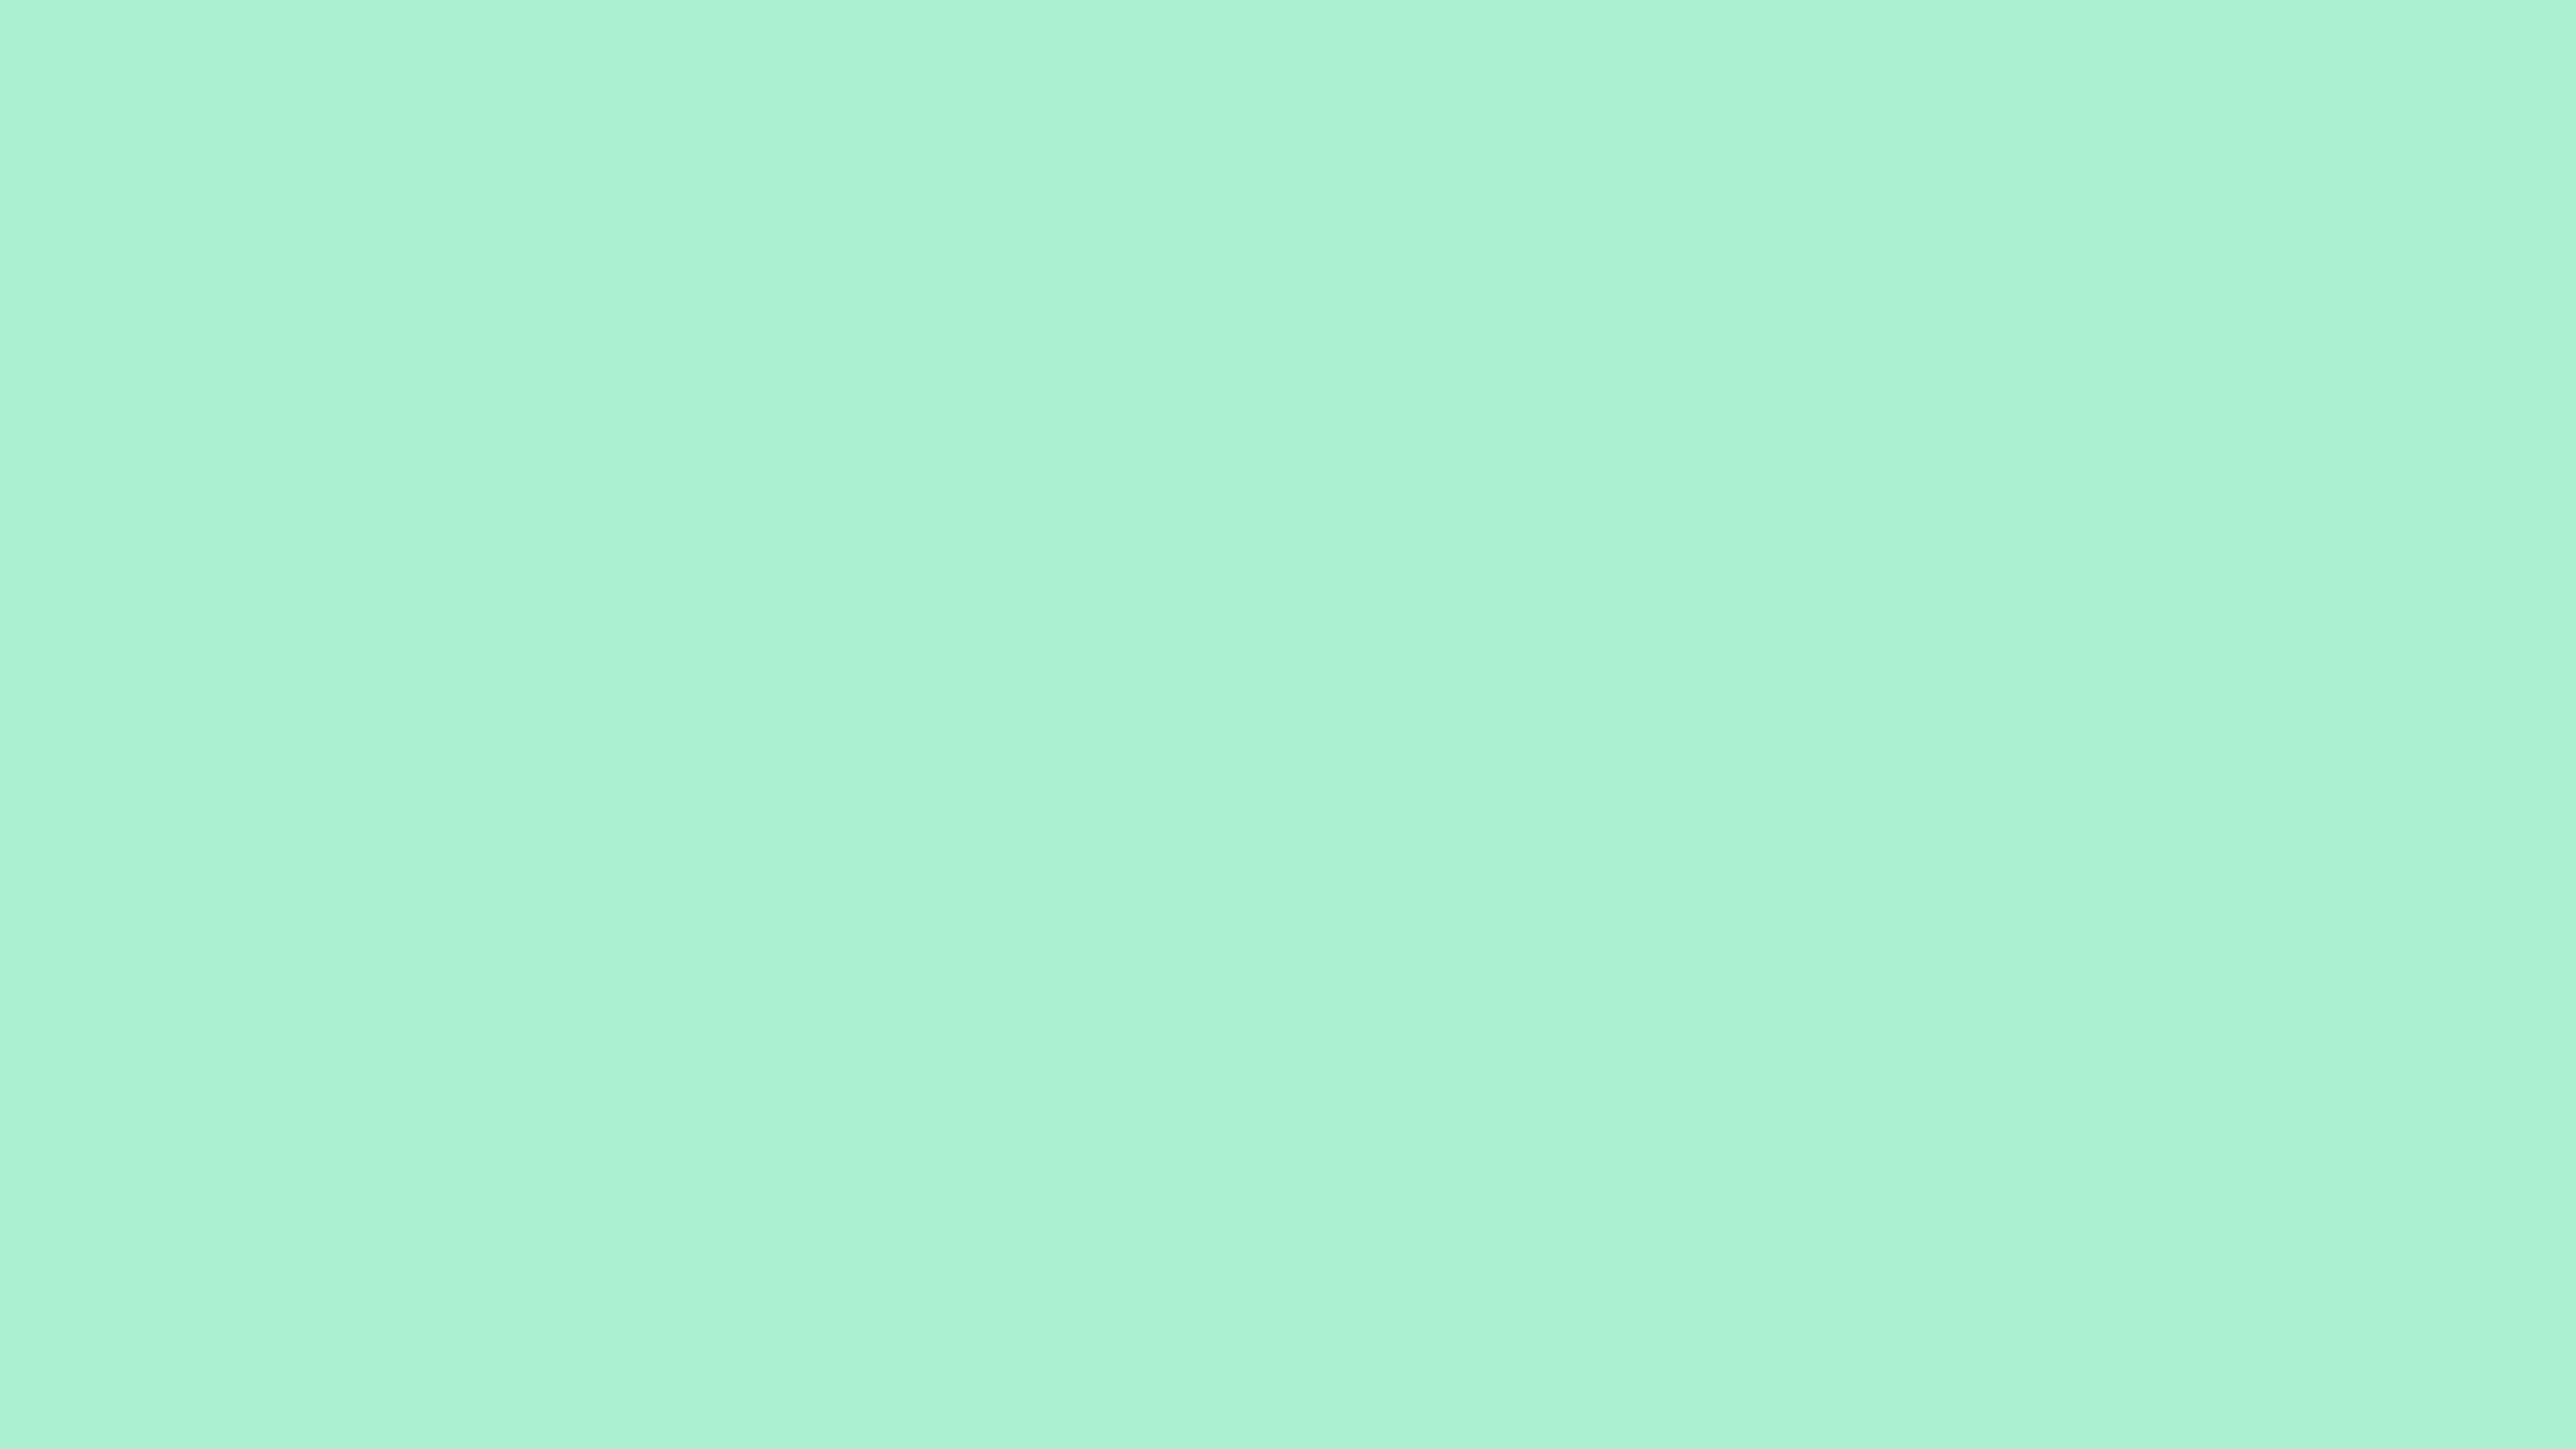 7680x4320 Magic Mint Solid Color Background